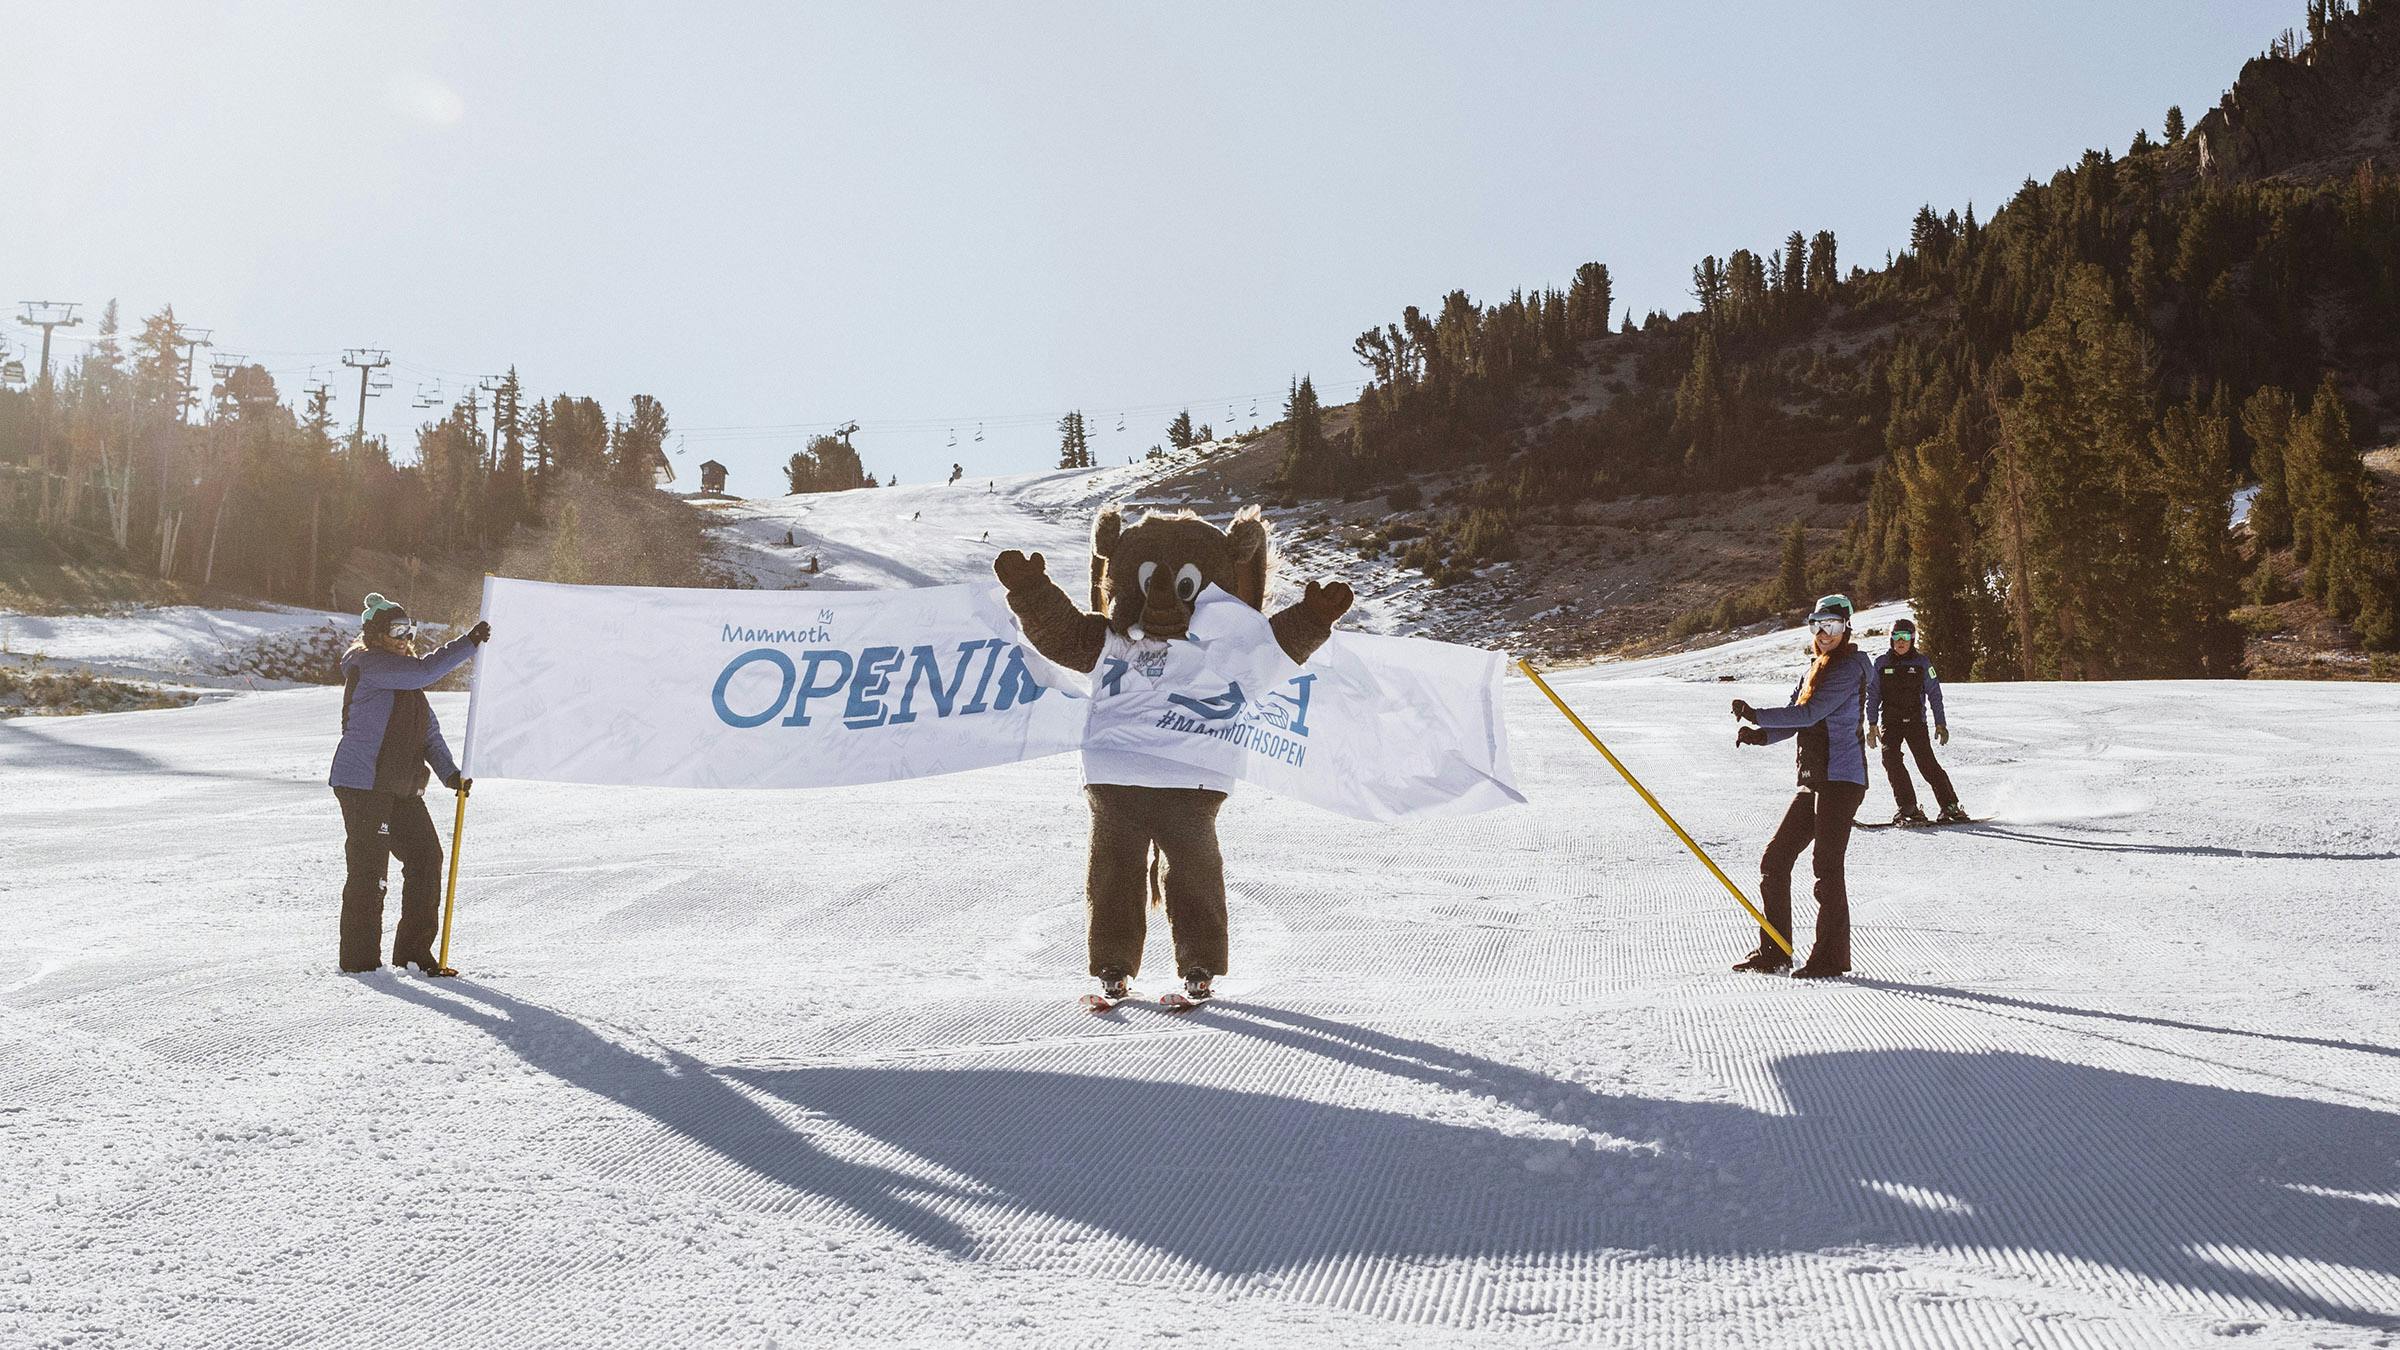 Woolly skiing through Opening Day banner